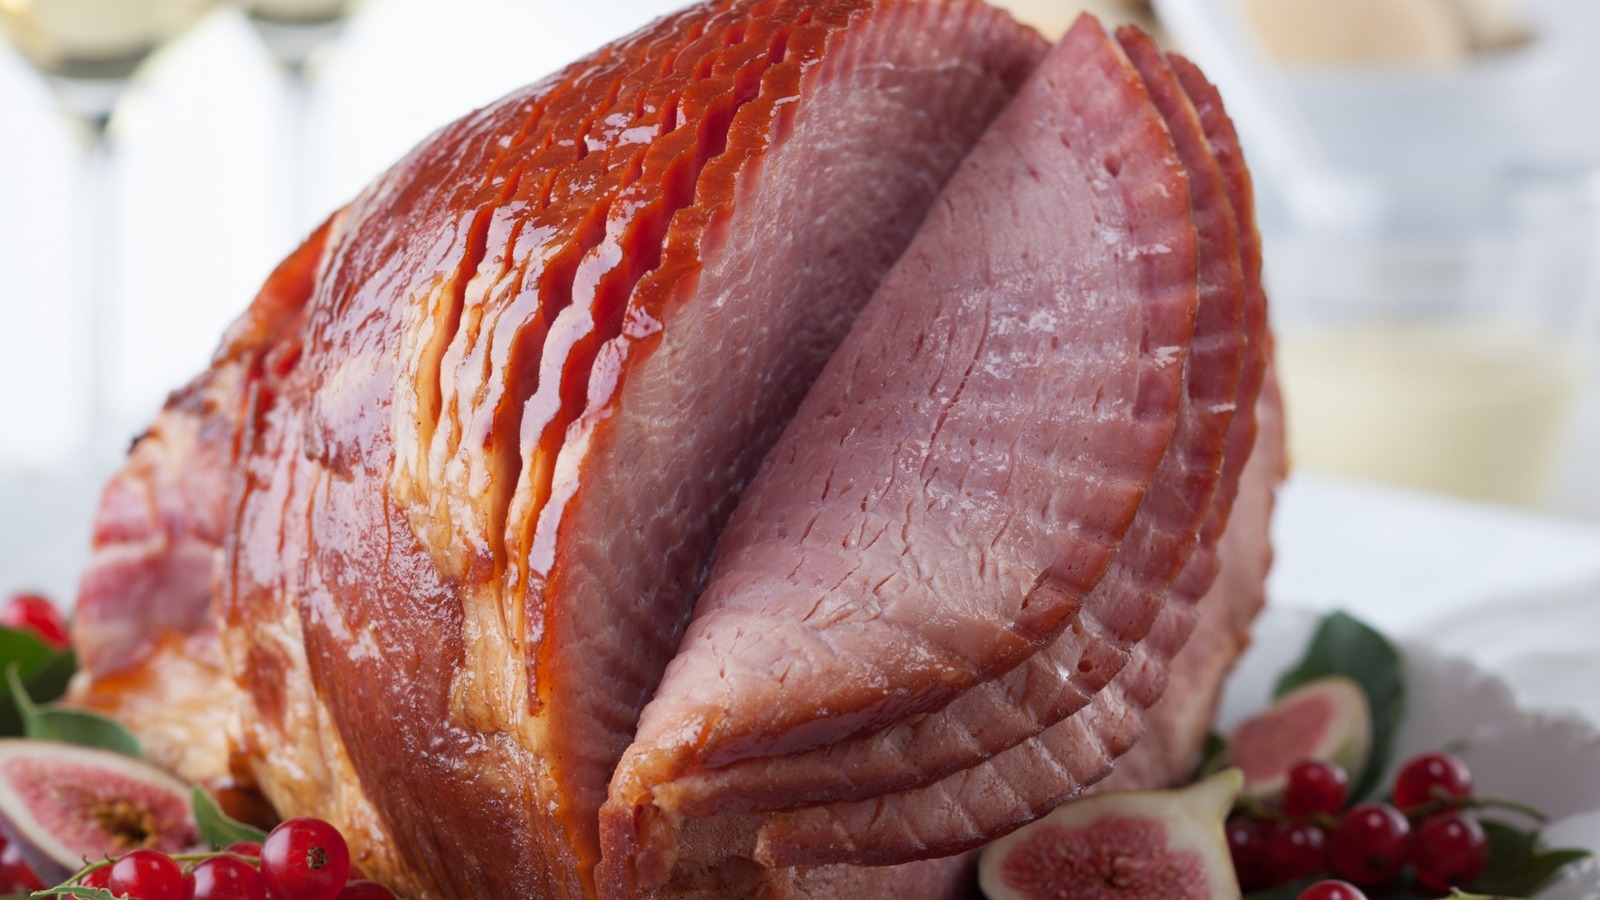 https://www.tastingtable.com/img/gallery/why-you-should-consider-cooking-spiral-cut-ham-in-a-roasting-bag/l-intro-1689871394.jpg